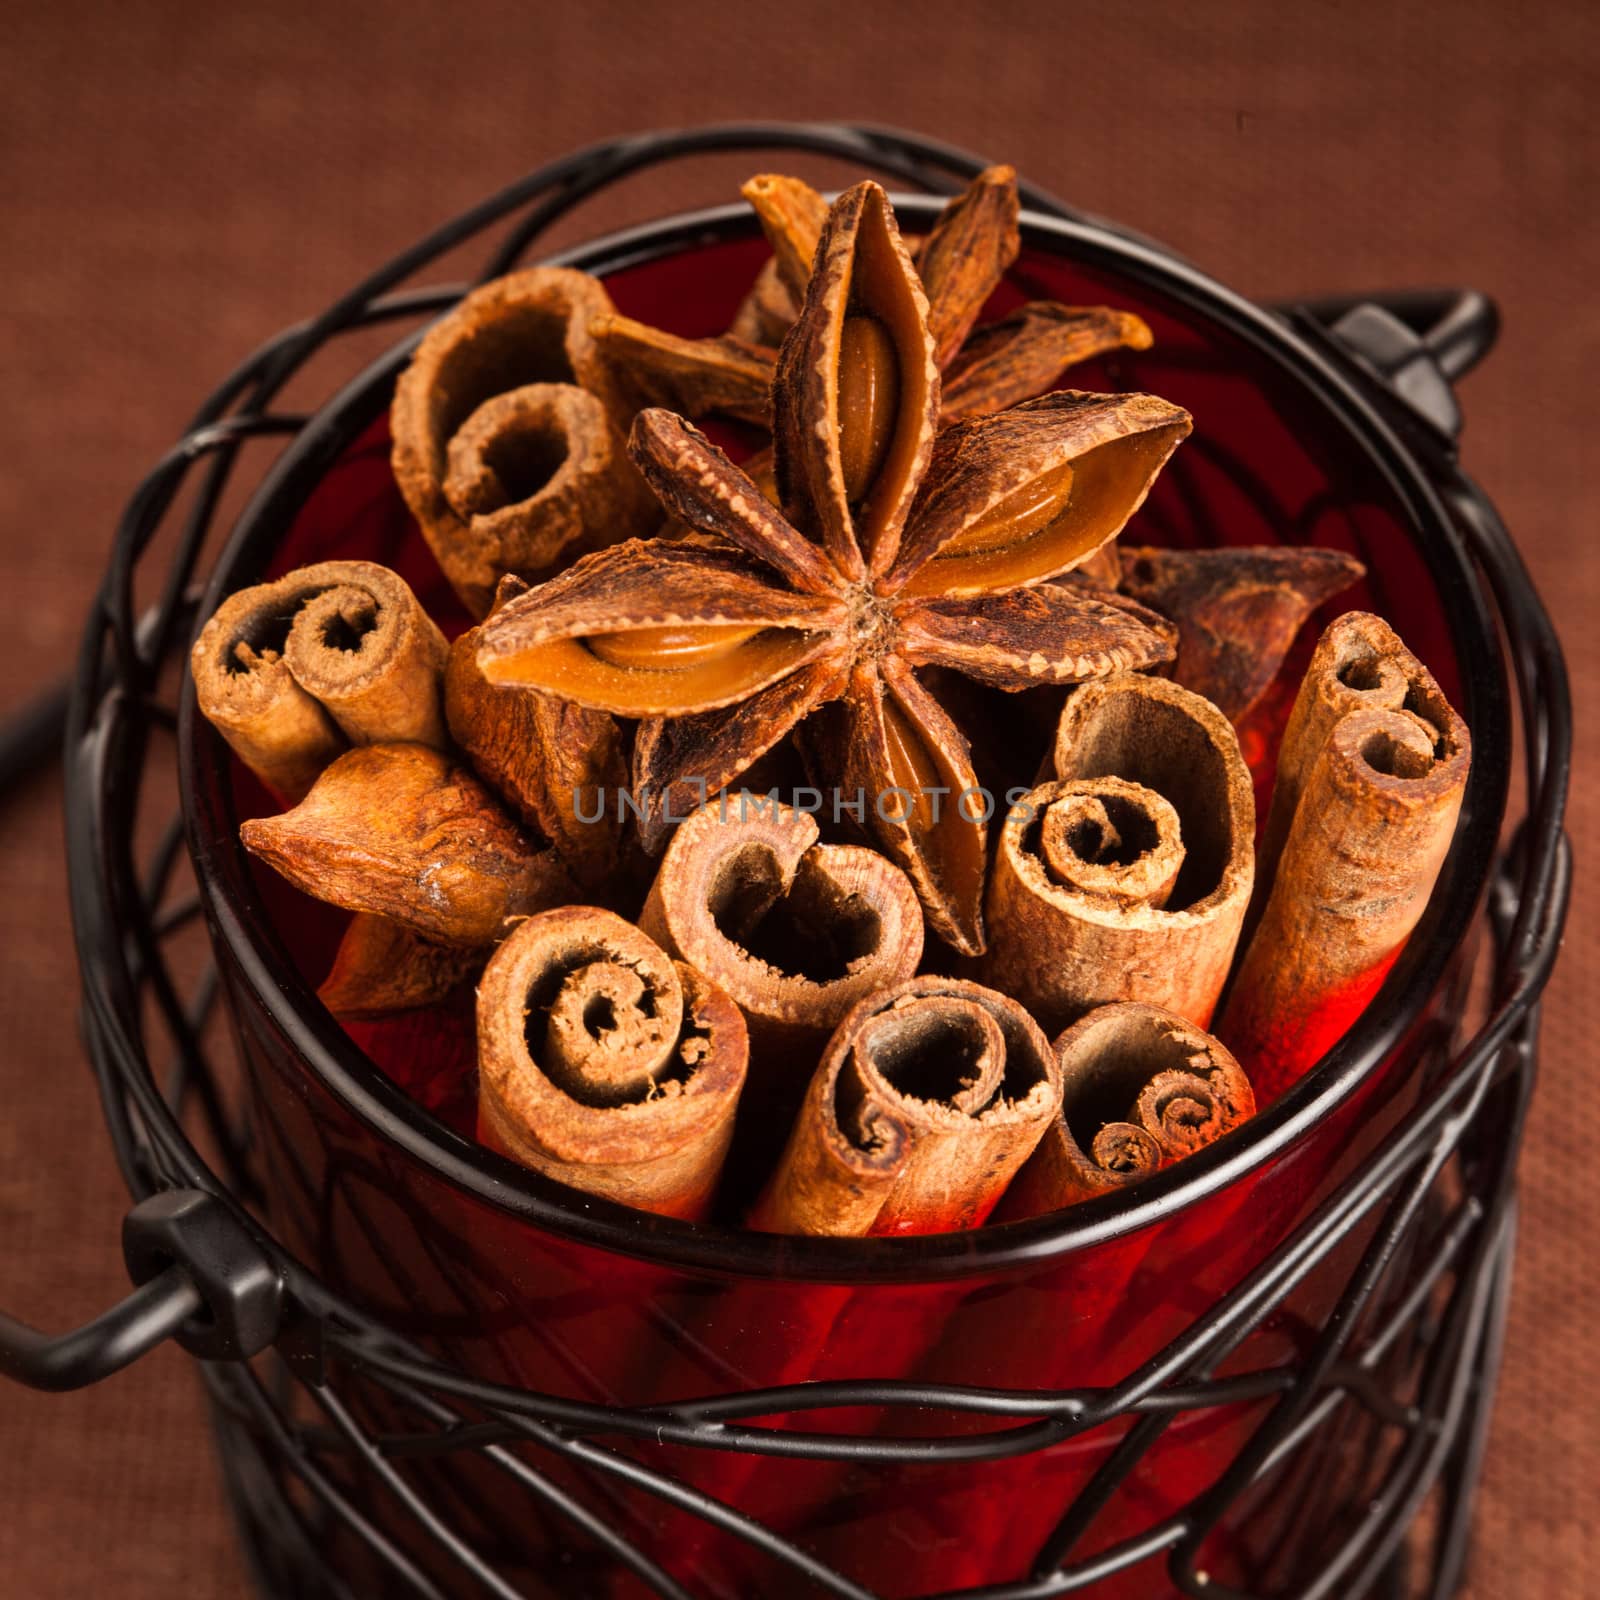 Cinnamon sticks and anise stars in pot. Spices decor for holidays